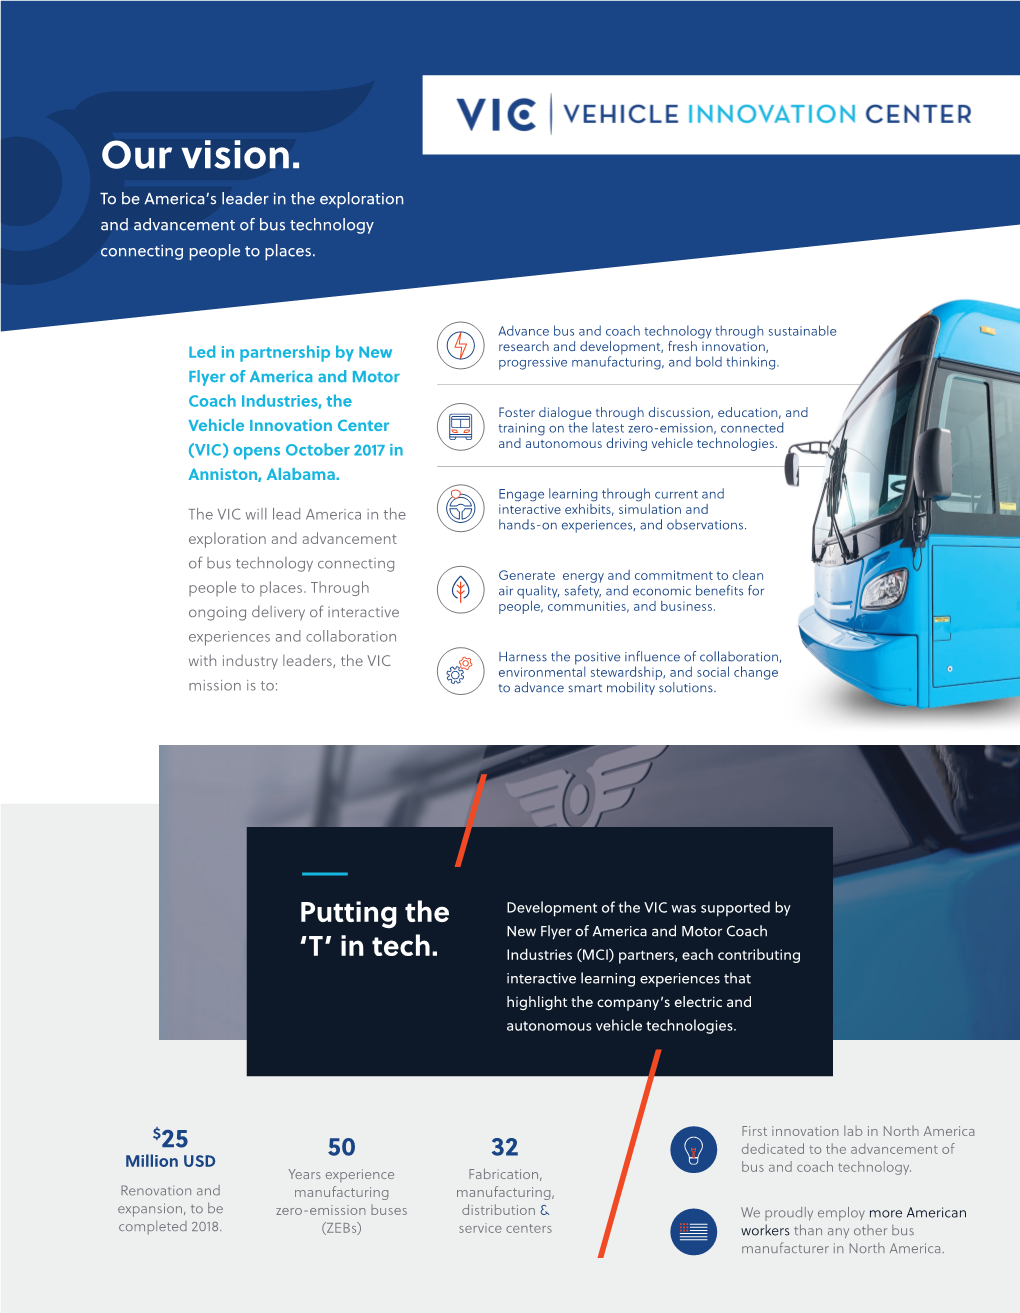 Our Vision. to Be America’S Leader in the Exploration and Advancement of Bus Technology Connecting People to Places